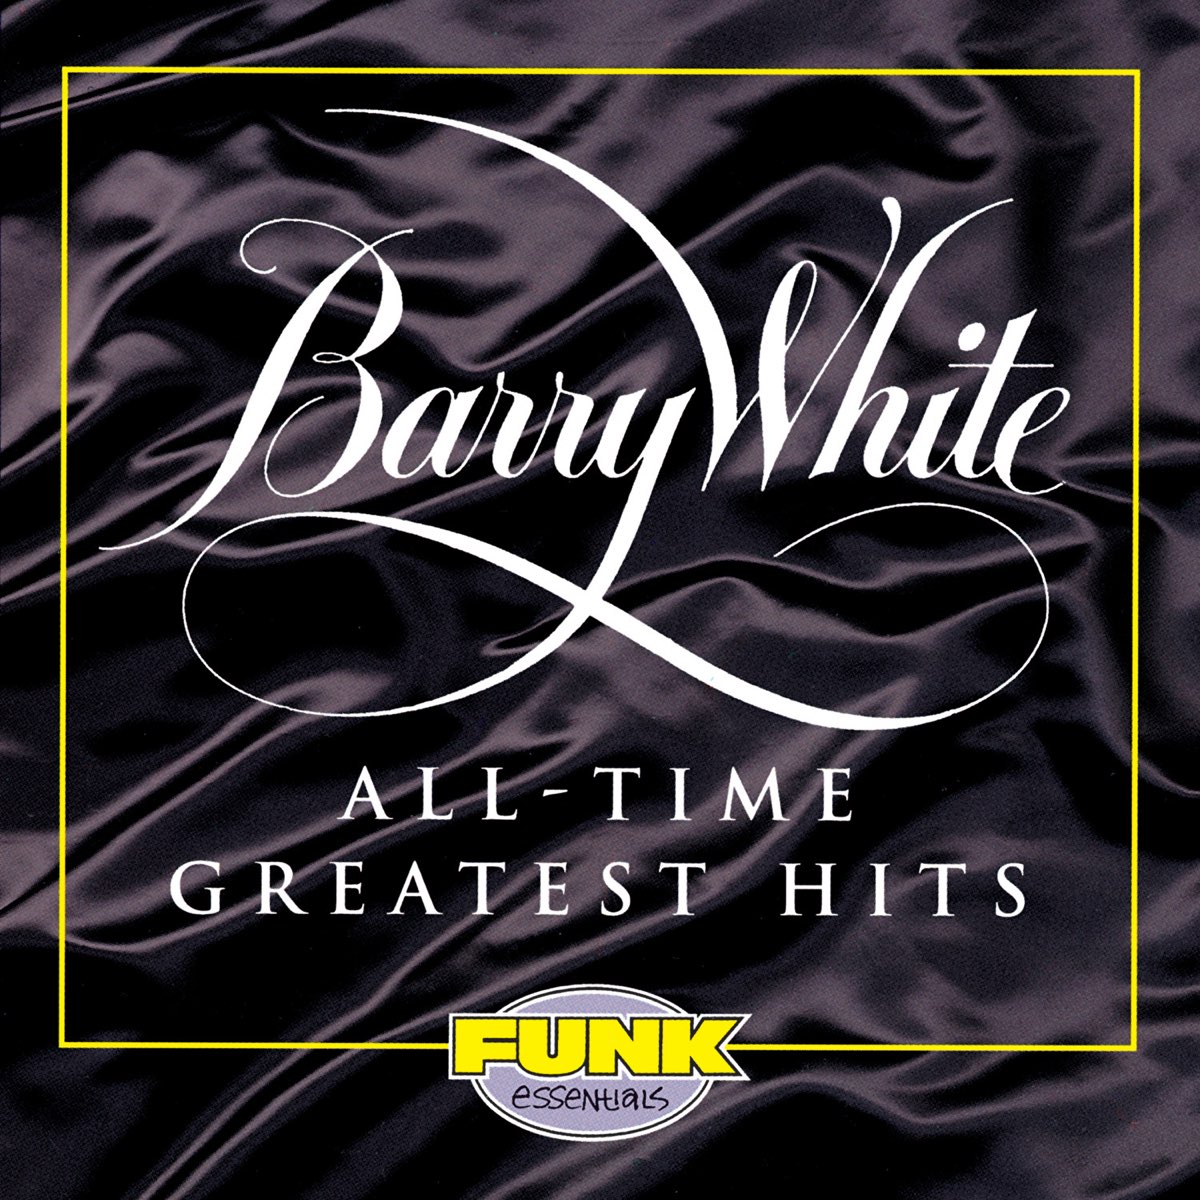 All-Time Greatest Hits by Barry White on Apple Music